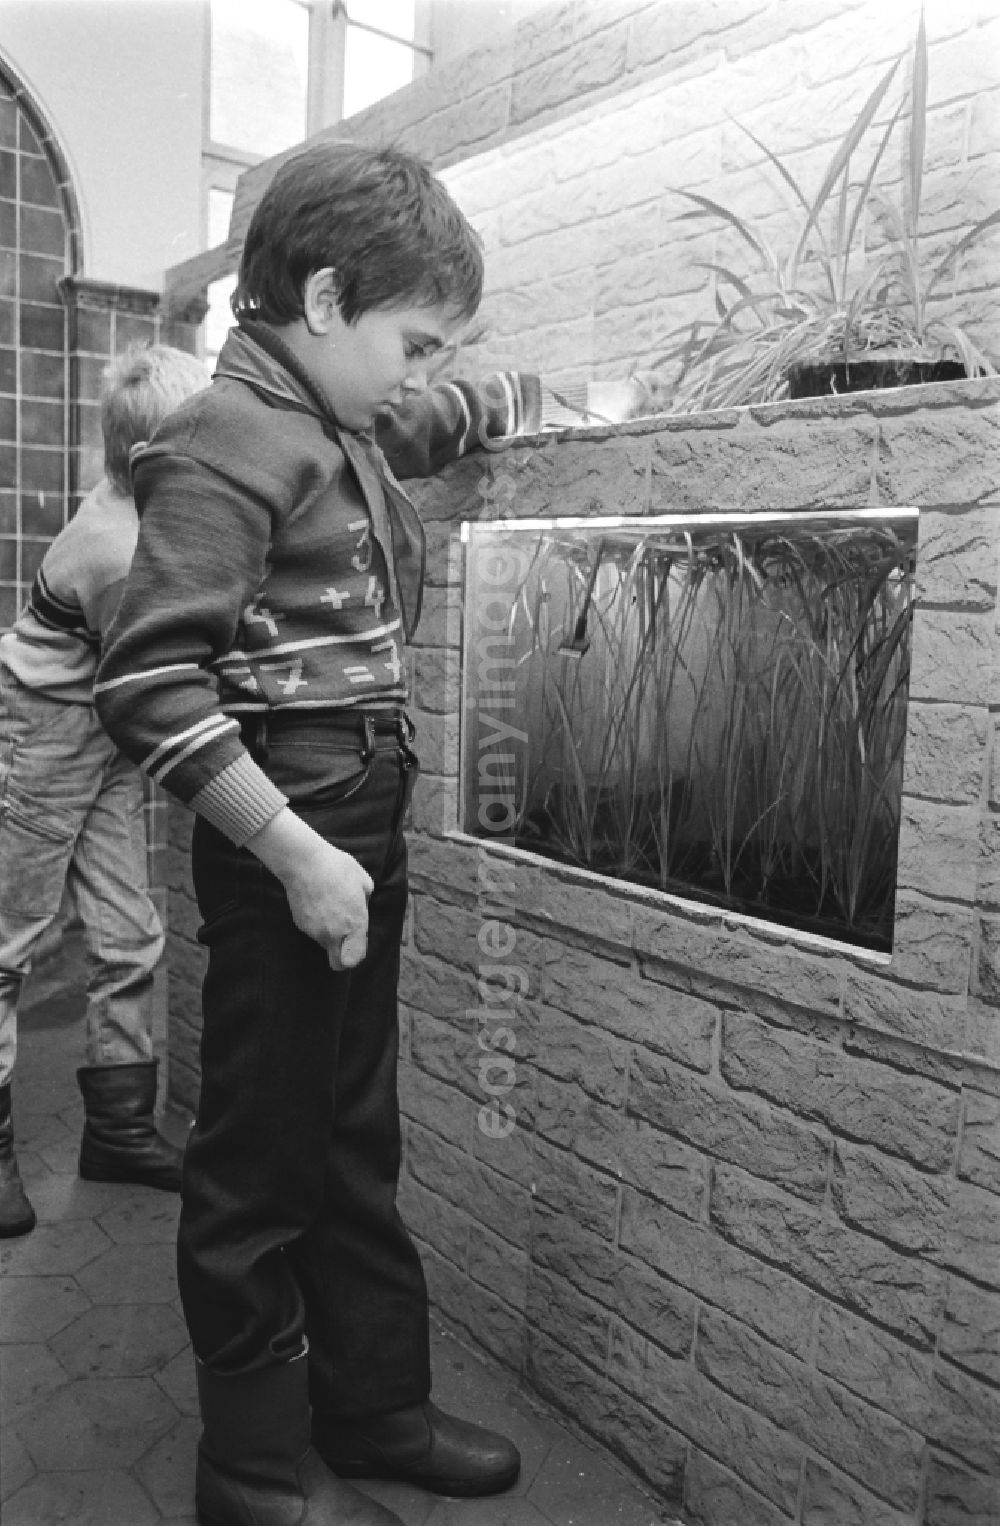 GDR photo archive: Laubusch - Secondary School OS Dr. Richard Sorge at Laubuscher Markt in the Upper Lusatian workers settlement Gartenstadt Erika in Laubusch in the state of Saxony on the territory of the former GDR, German Democratic Republic. Pupils standing in front of an aquarium in the school building